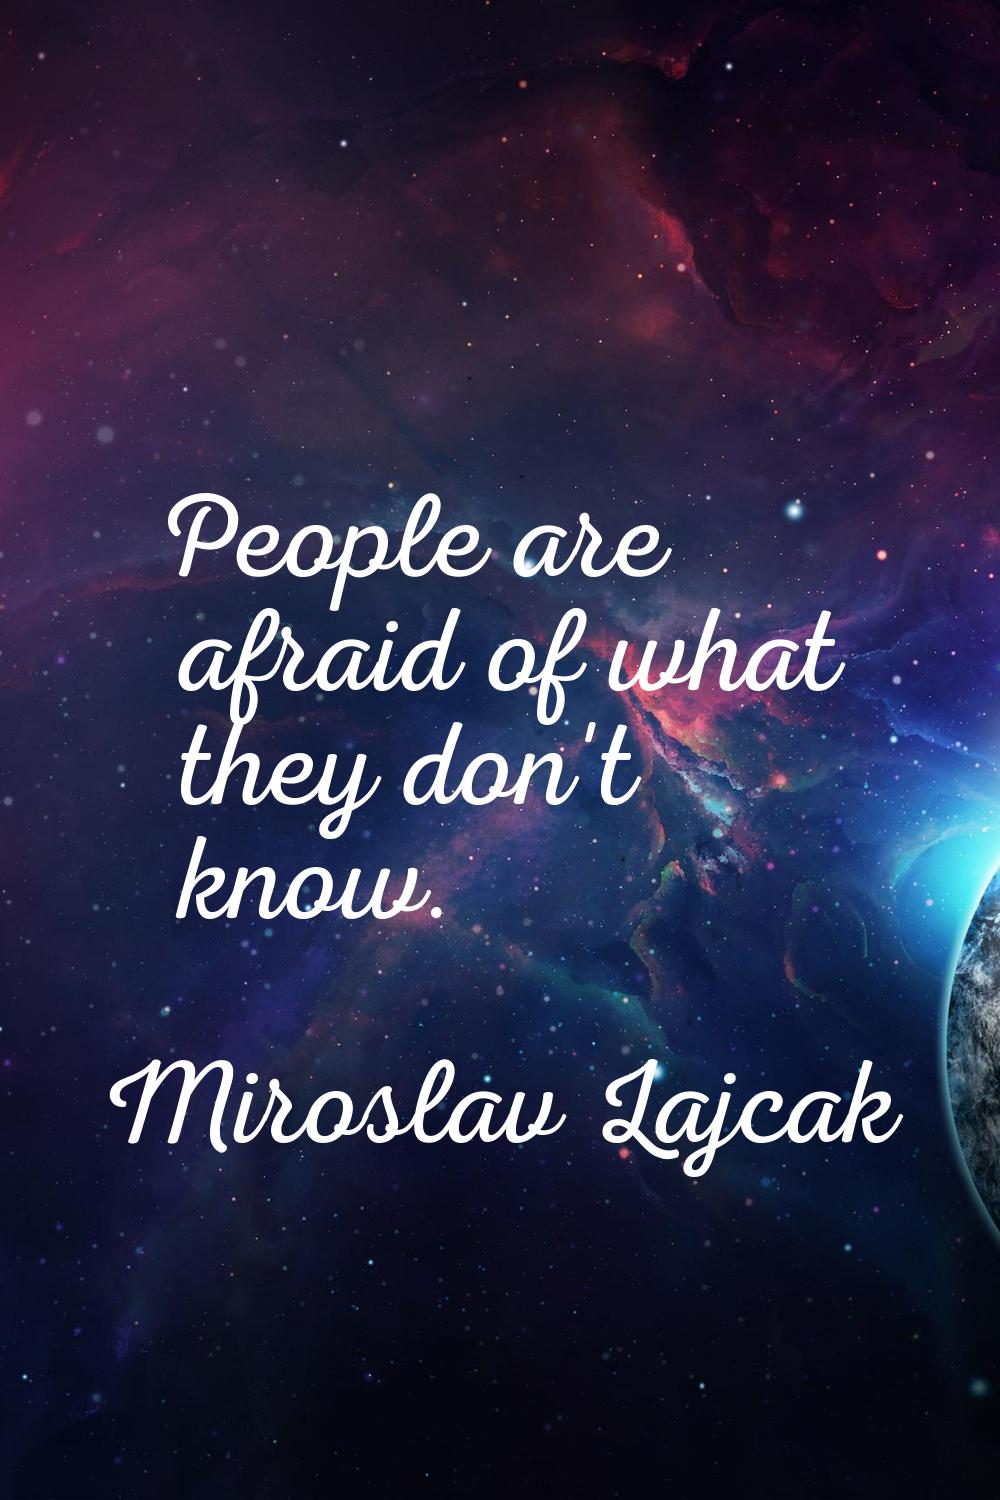 People are afraid of what they don't know.